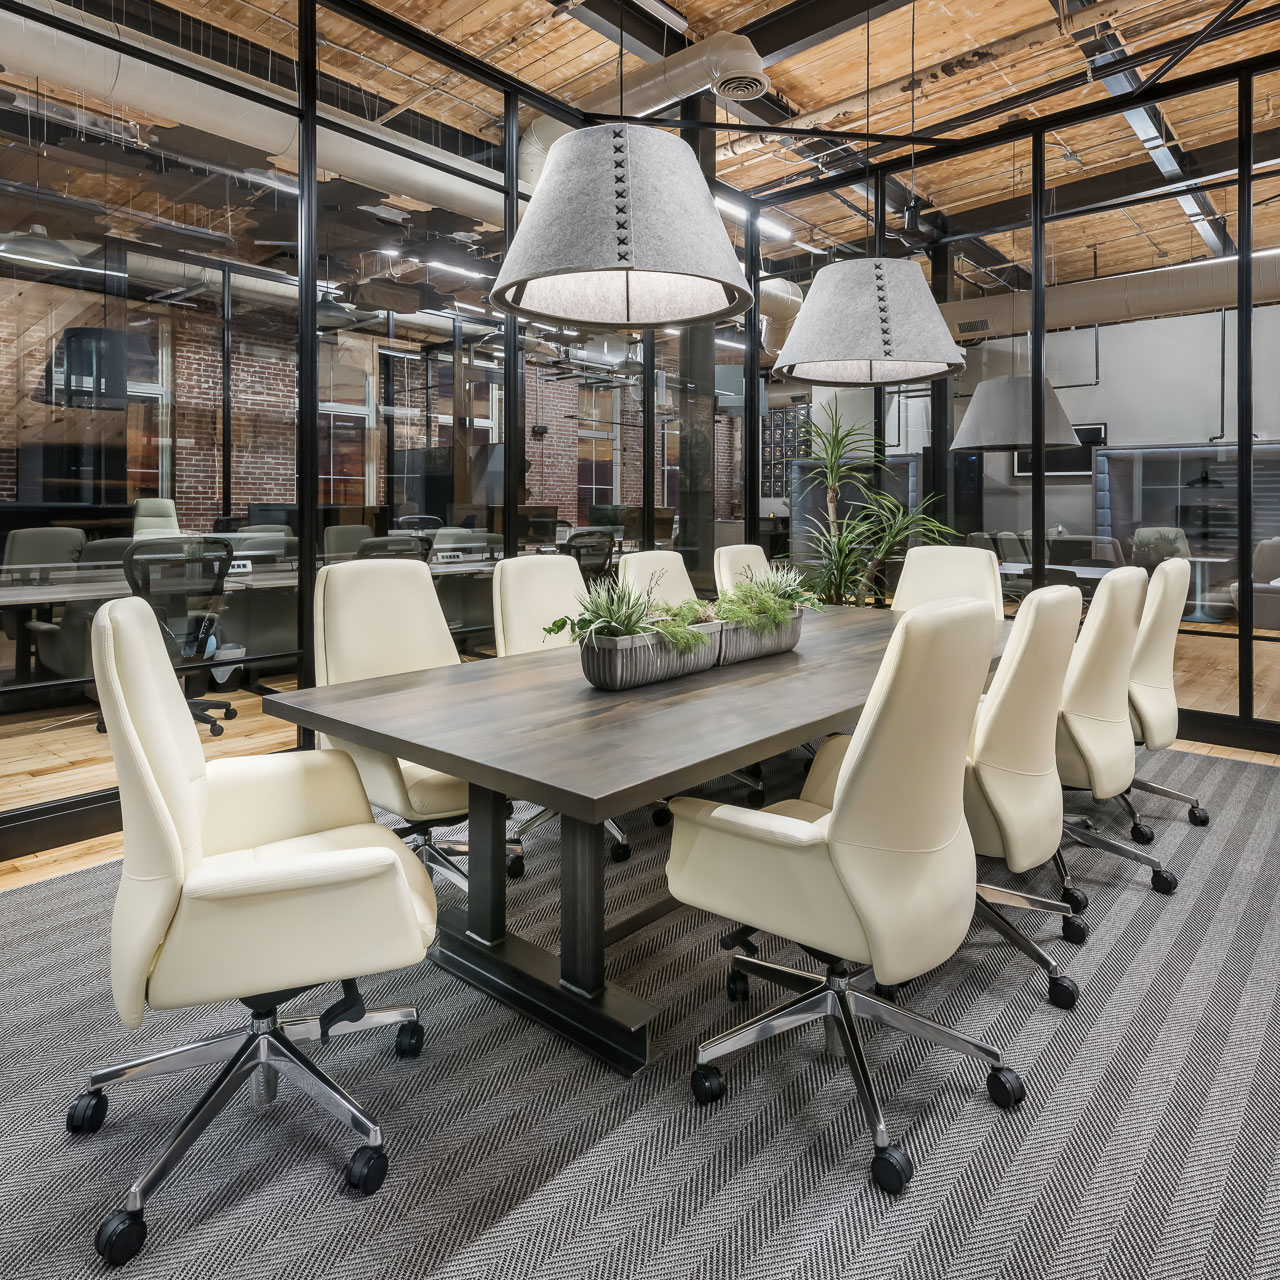 Conference Room Table With Off-White Leather Chairs